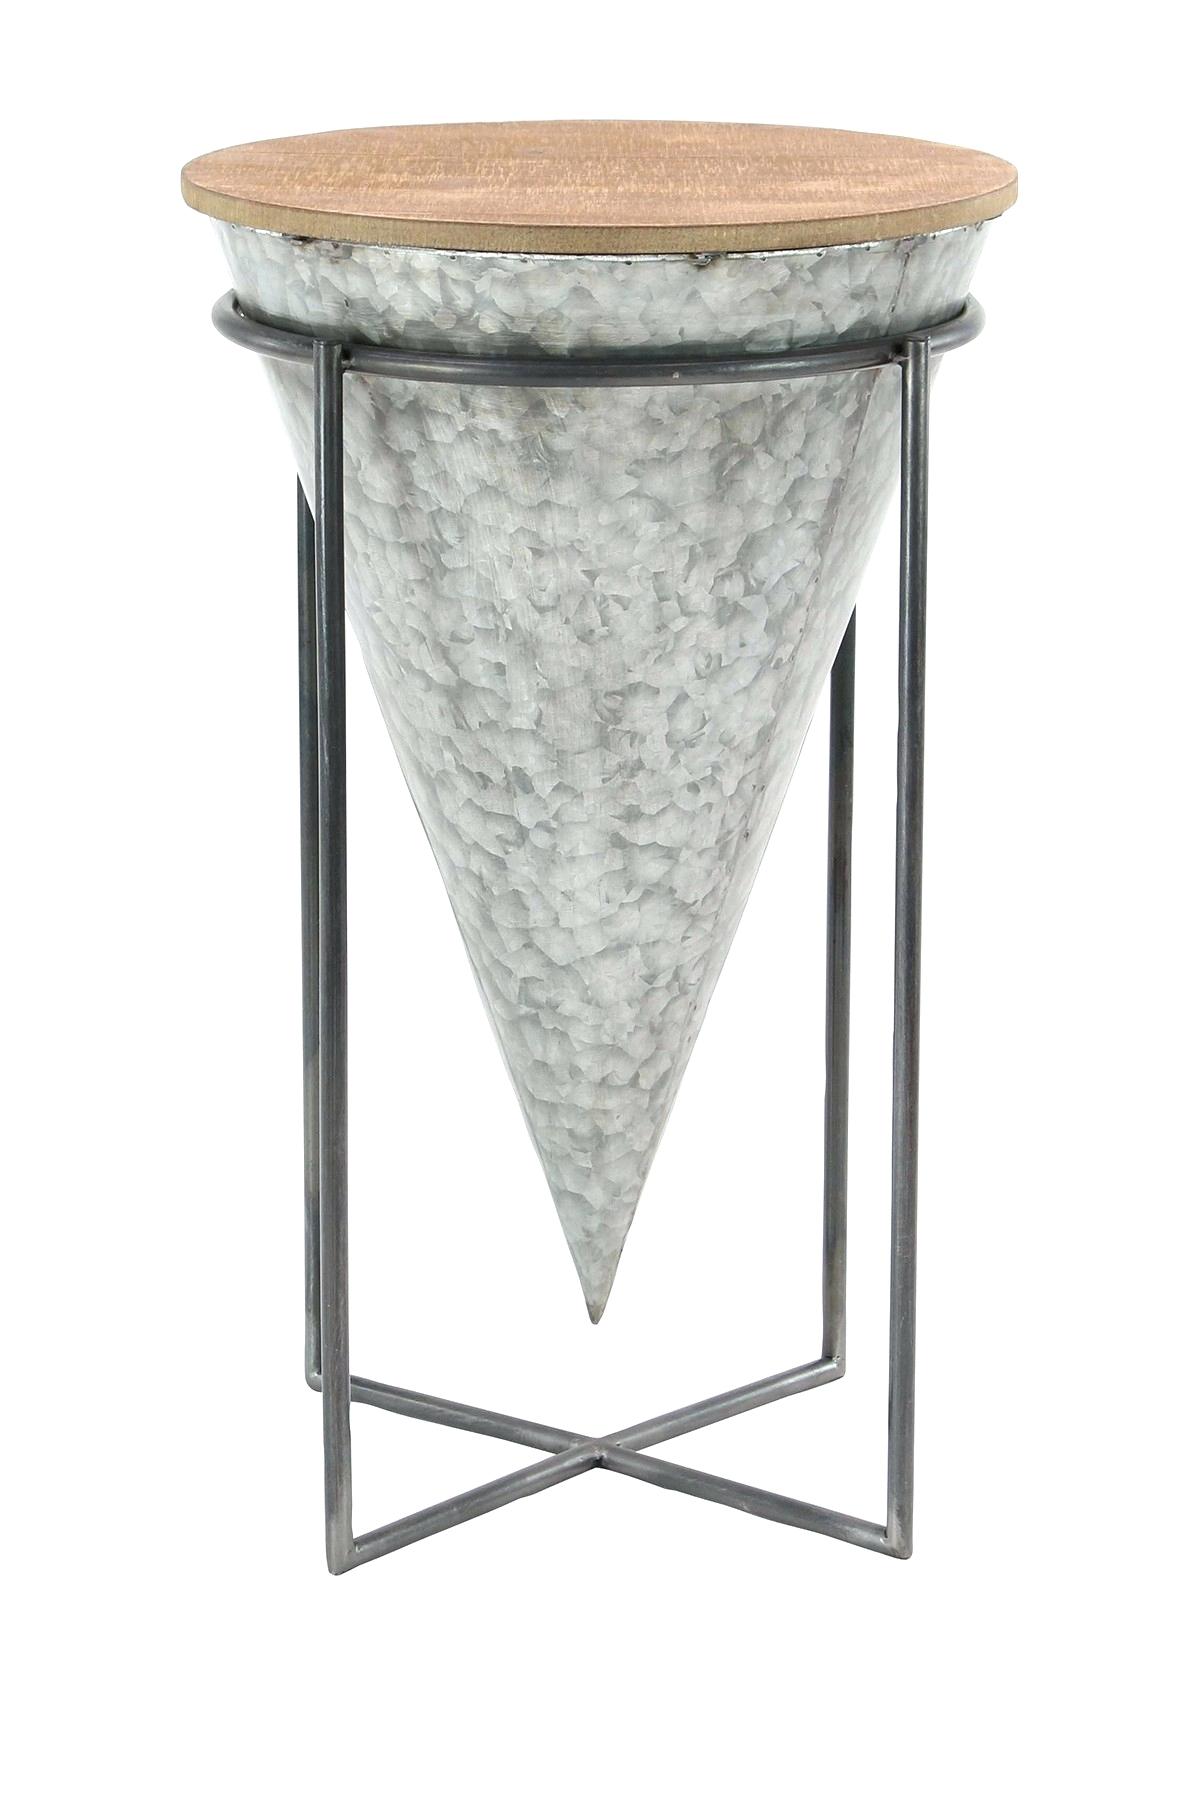 gray accent table contemporary cabinet large brown metal wood grey corner triangle concrete outdoor setting wine rack kitchen battery operated night light lamp white resin side